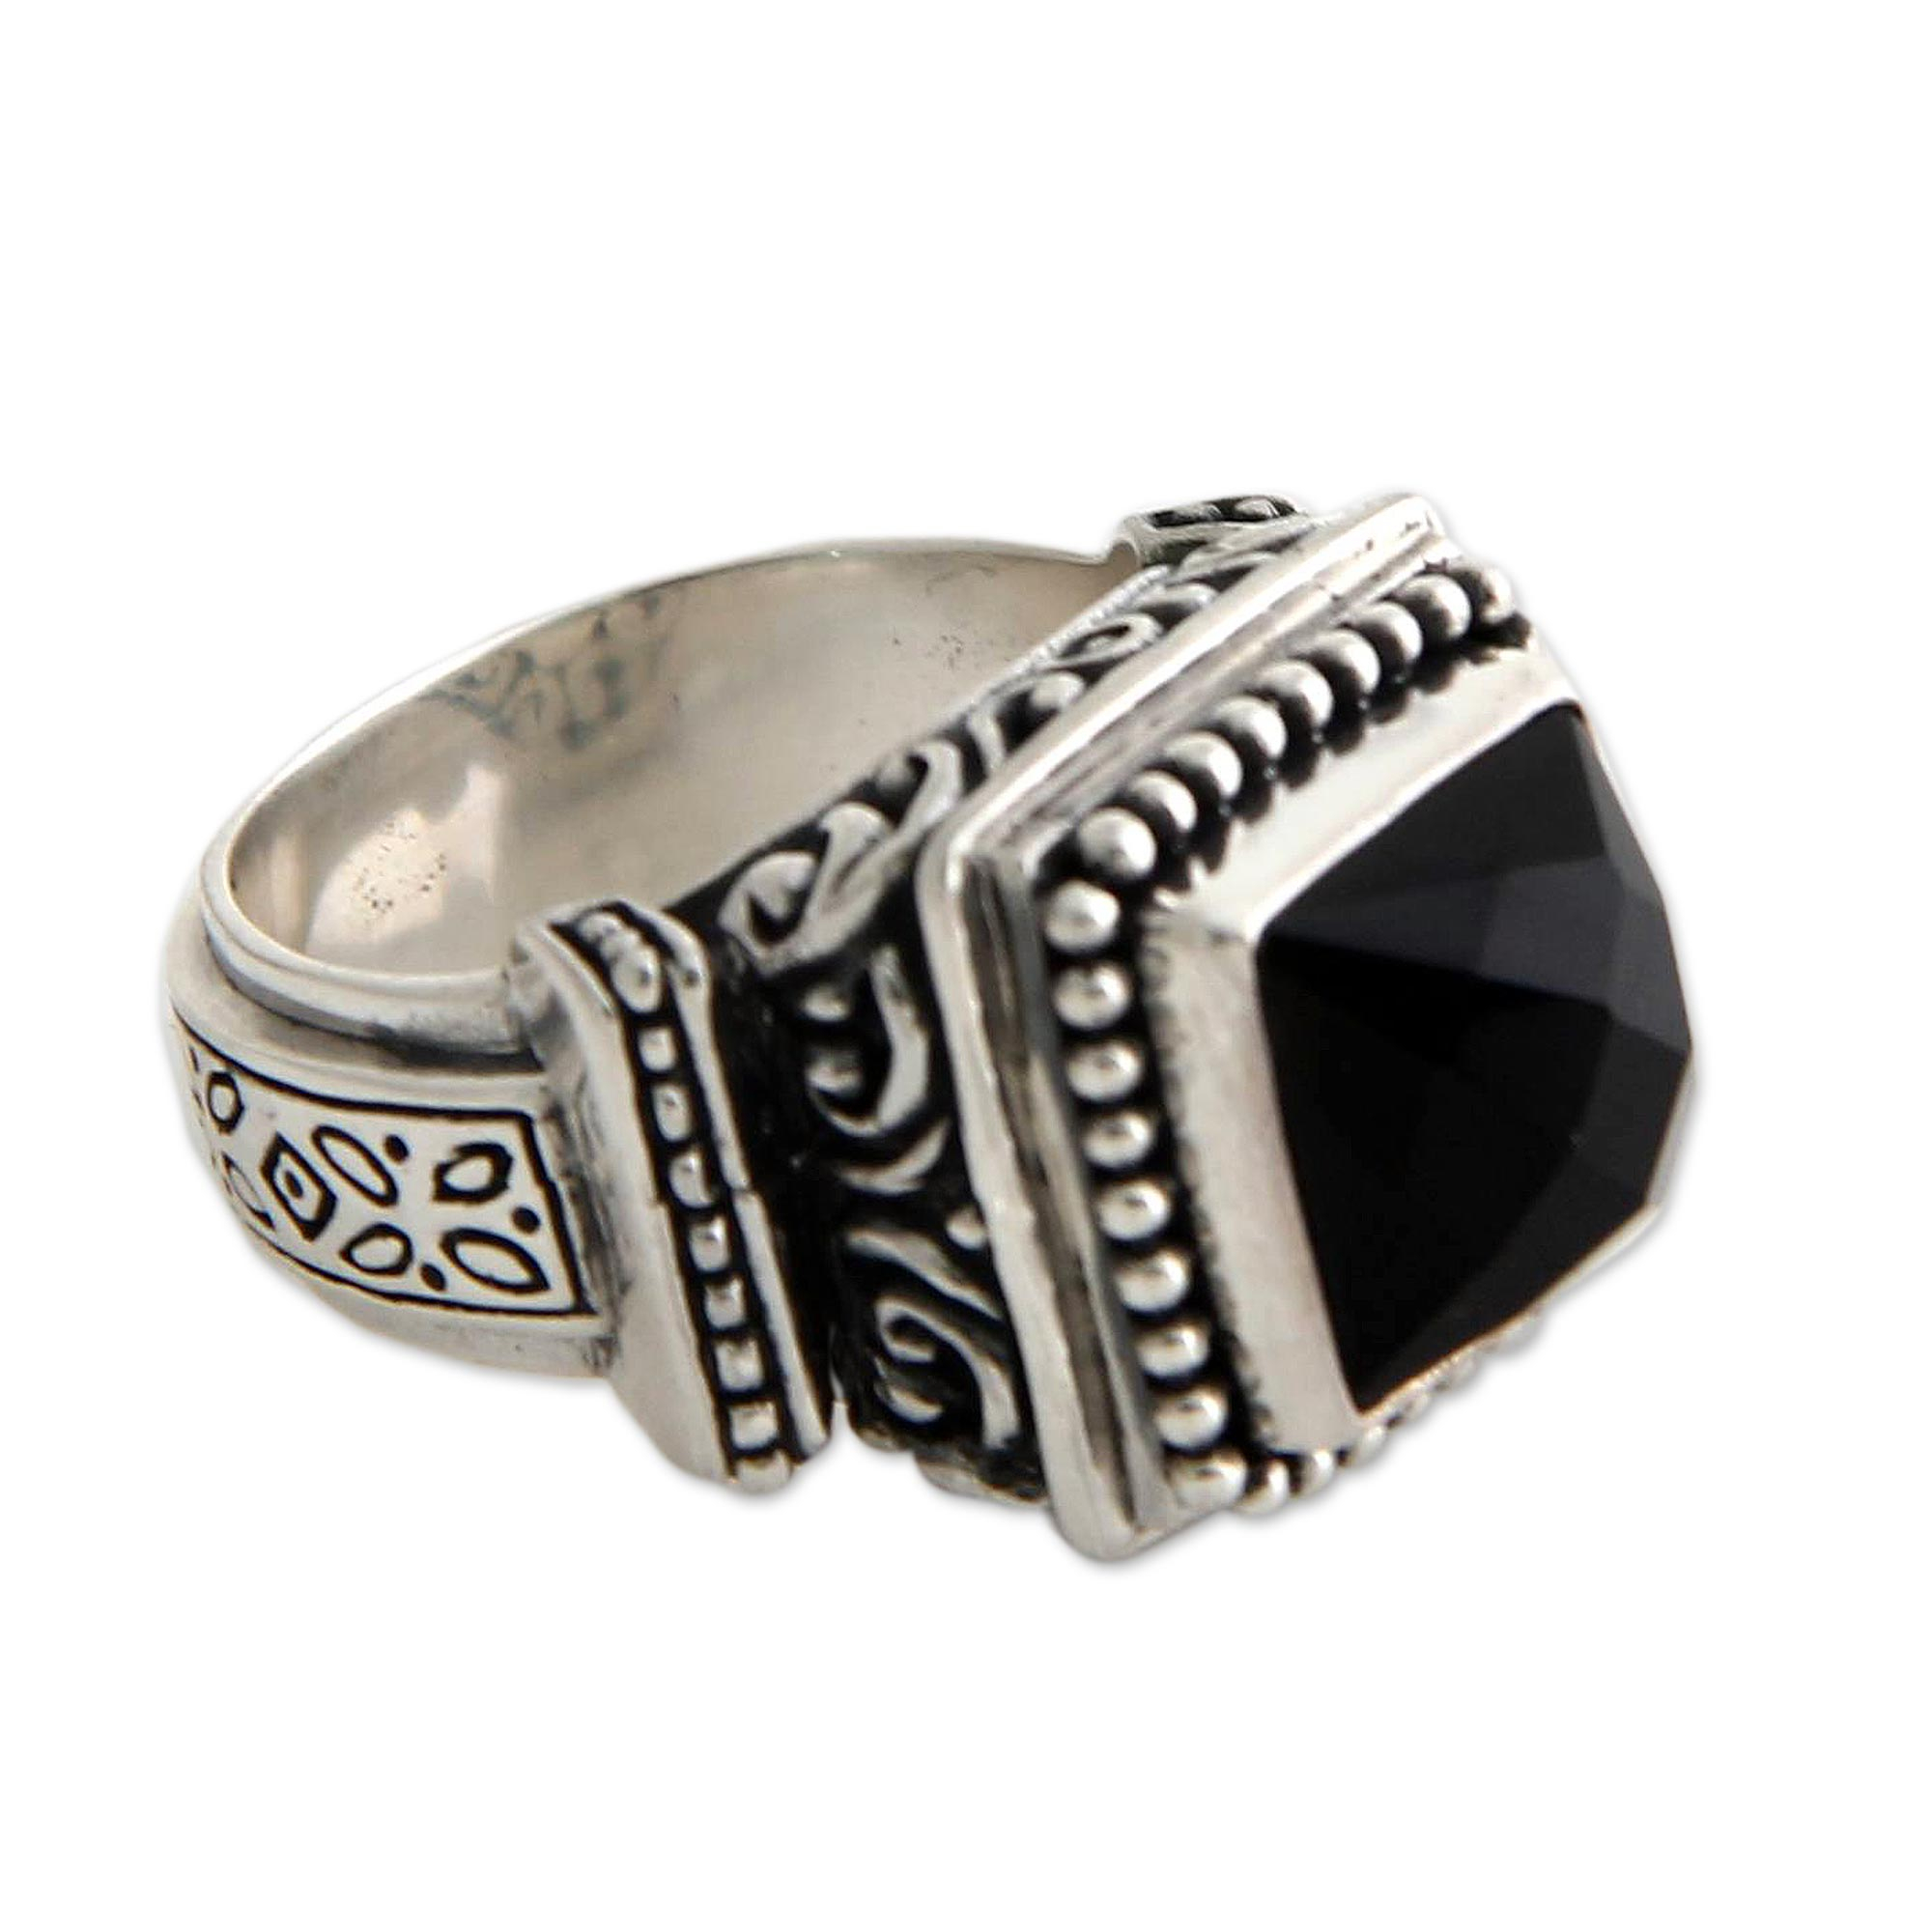 Onyx and Sterling Silver Cocktail Ring - Midnight Temple | NOVICA